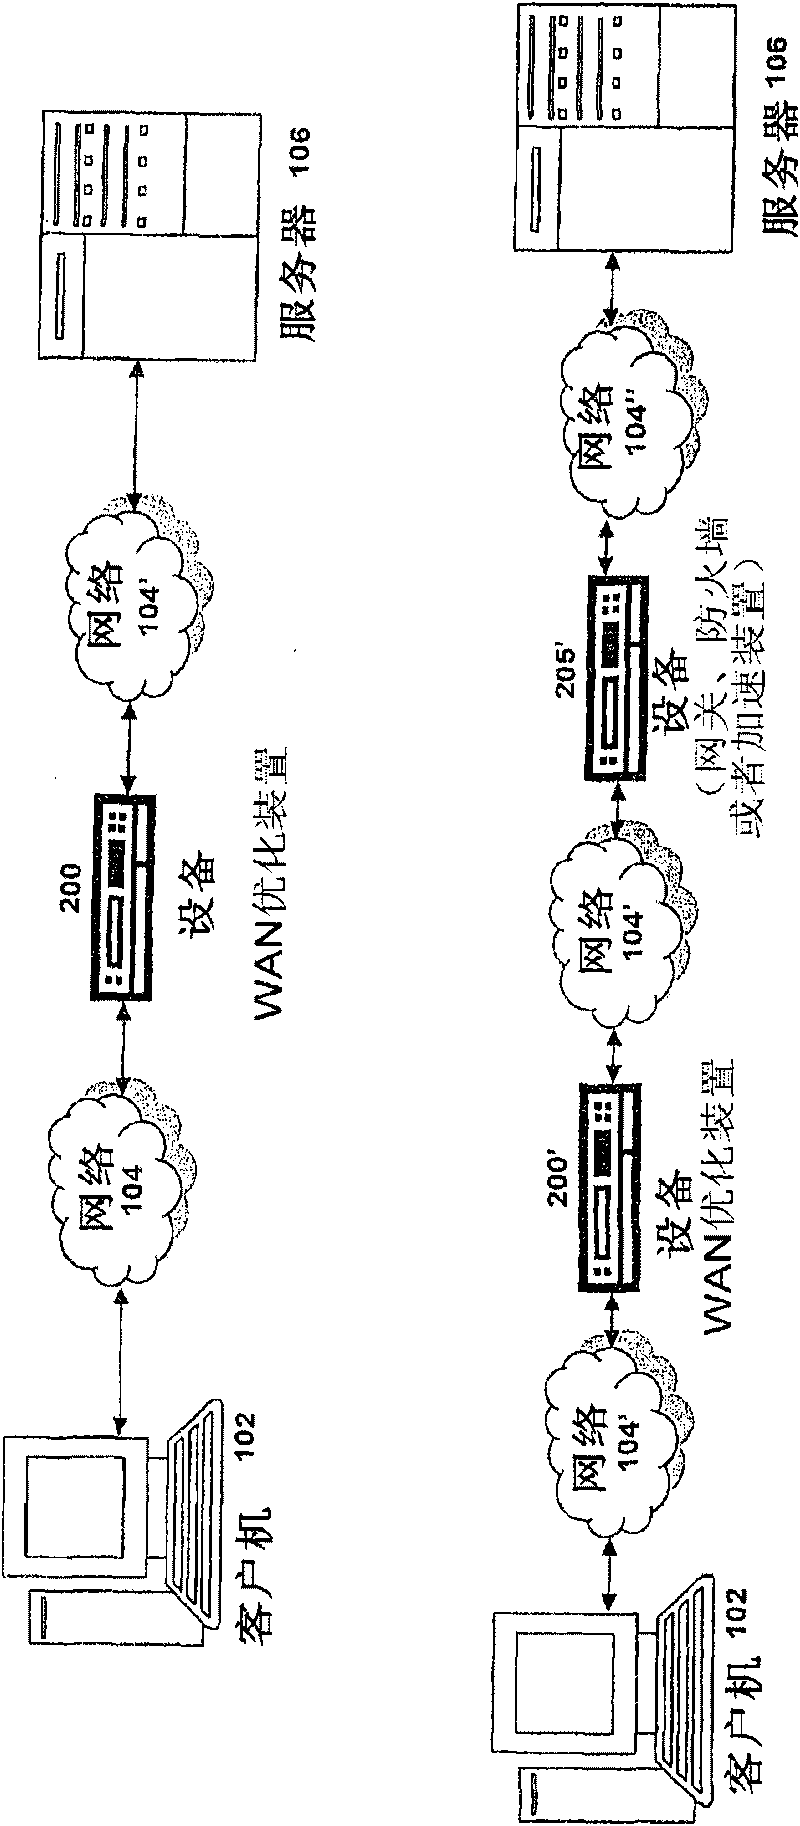 Systems and methods for providing quality of service precedence in TCP congestion control